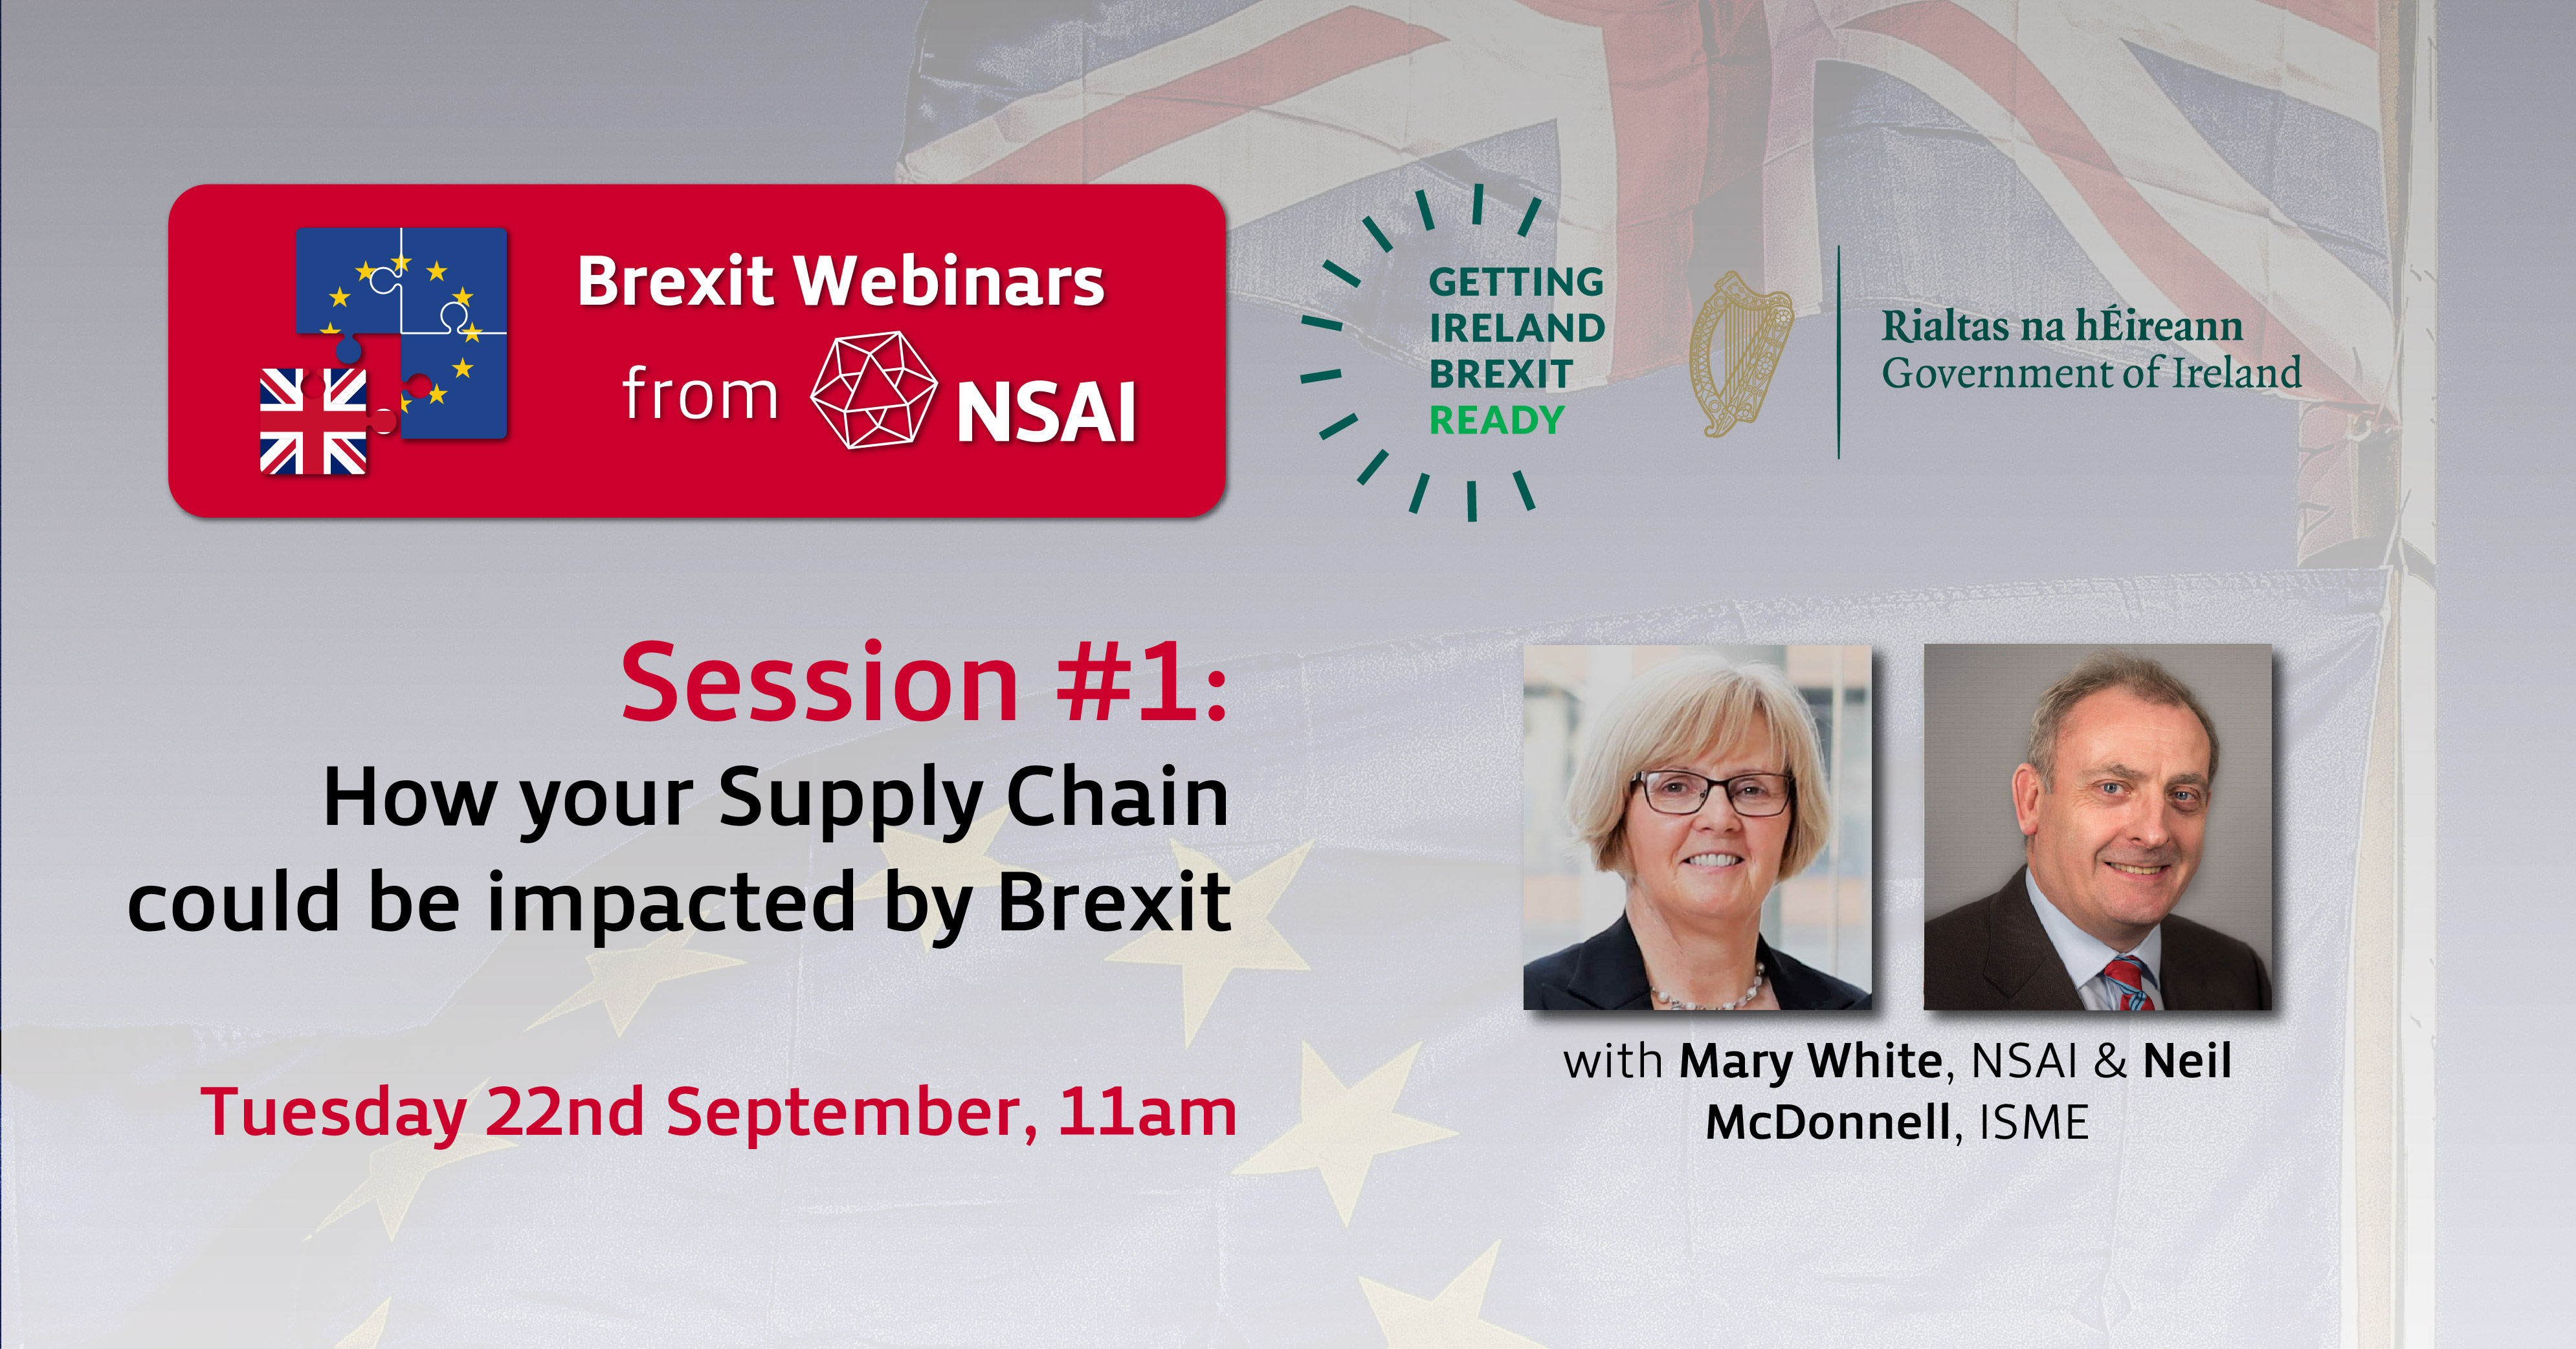 Brexit Webinars from NSAI Session #1: How your Supply Chain could be impacted by Brexit with Mary White, NSAI & Neil McDonnell, ISME Tuesday 22nd September, 11am